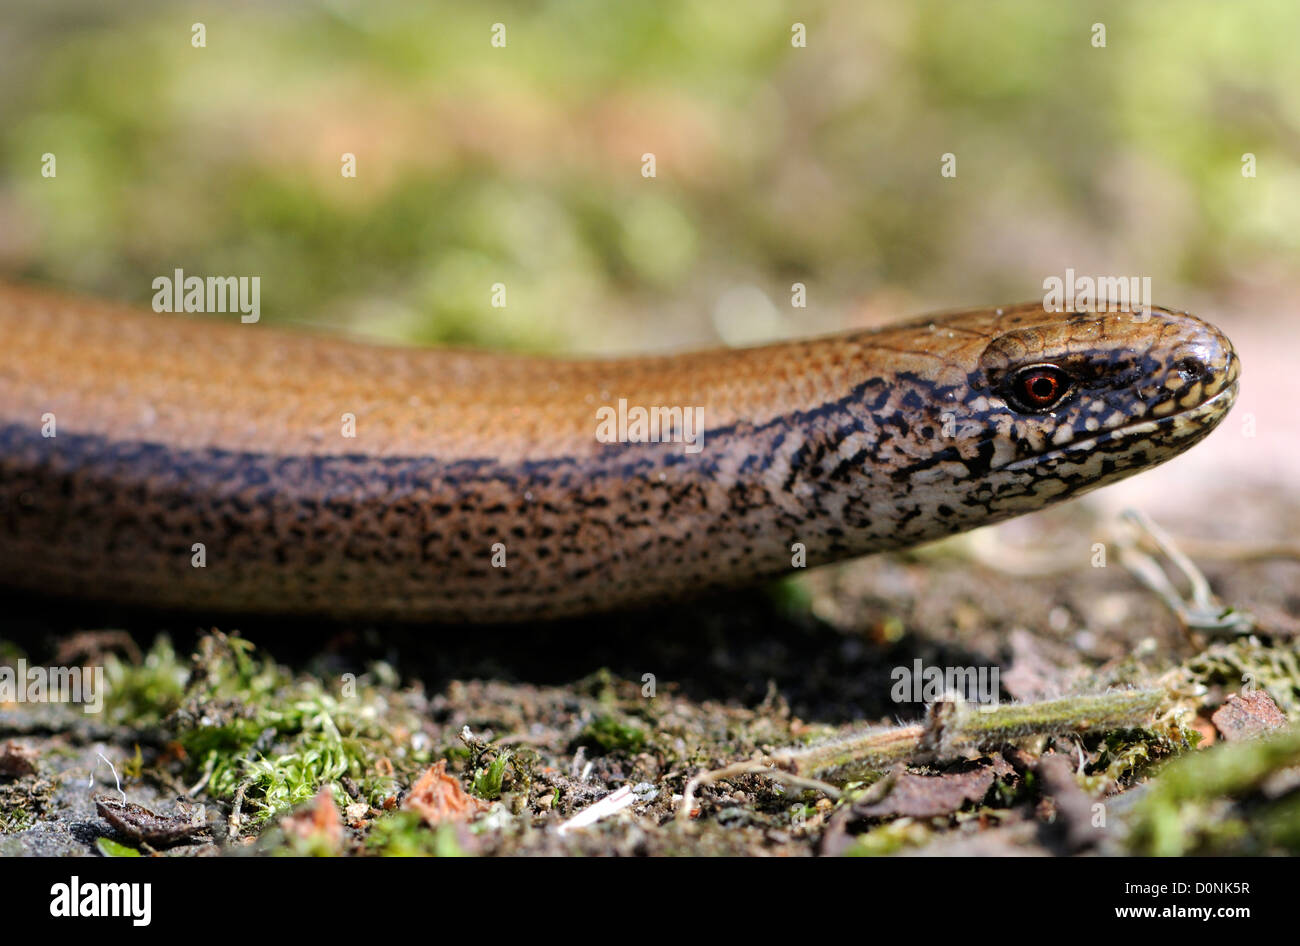 Portrait of a slow worm (Anguis fragilis) suns itself on a sunny step in the spring sun after its hibernation. Stock Photo